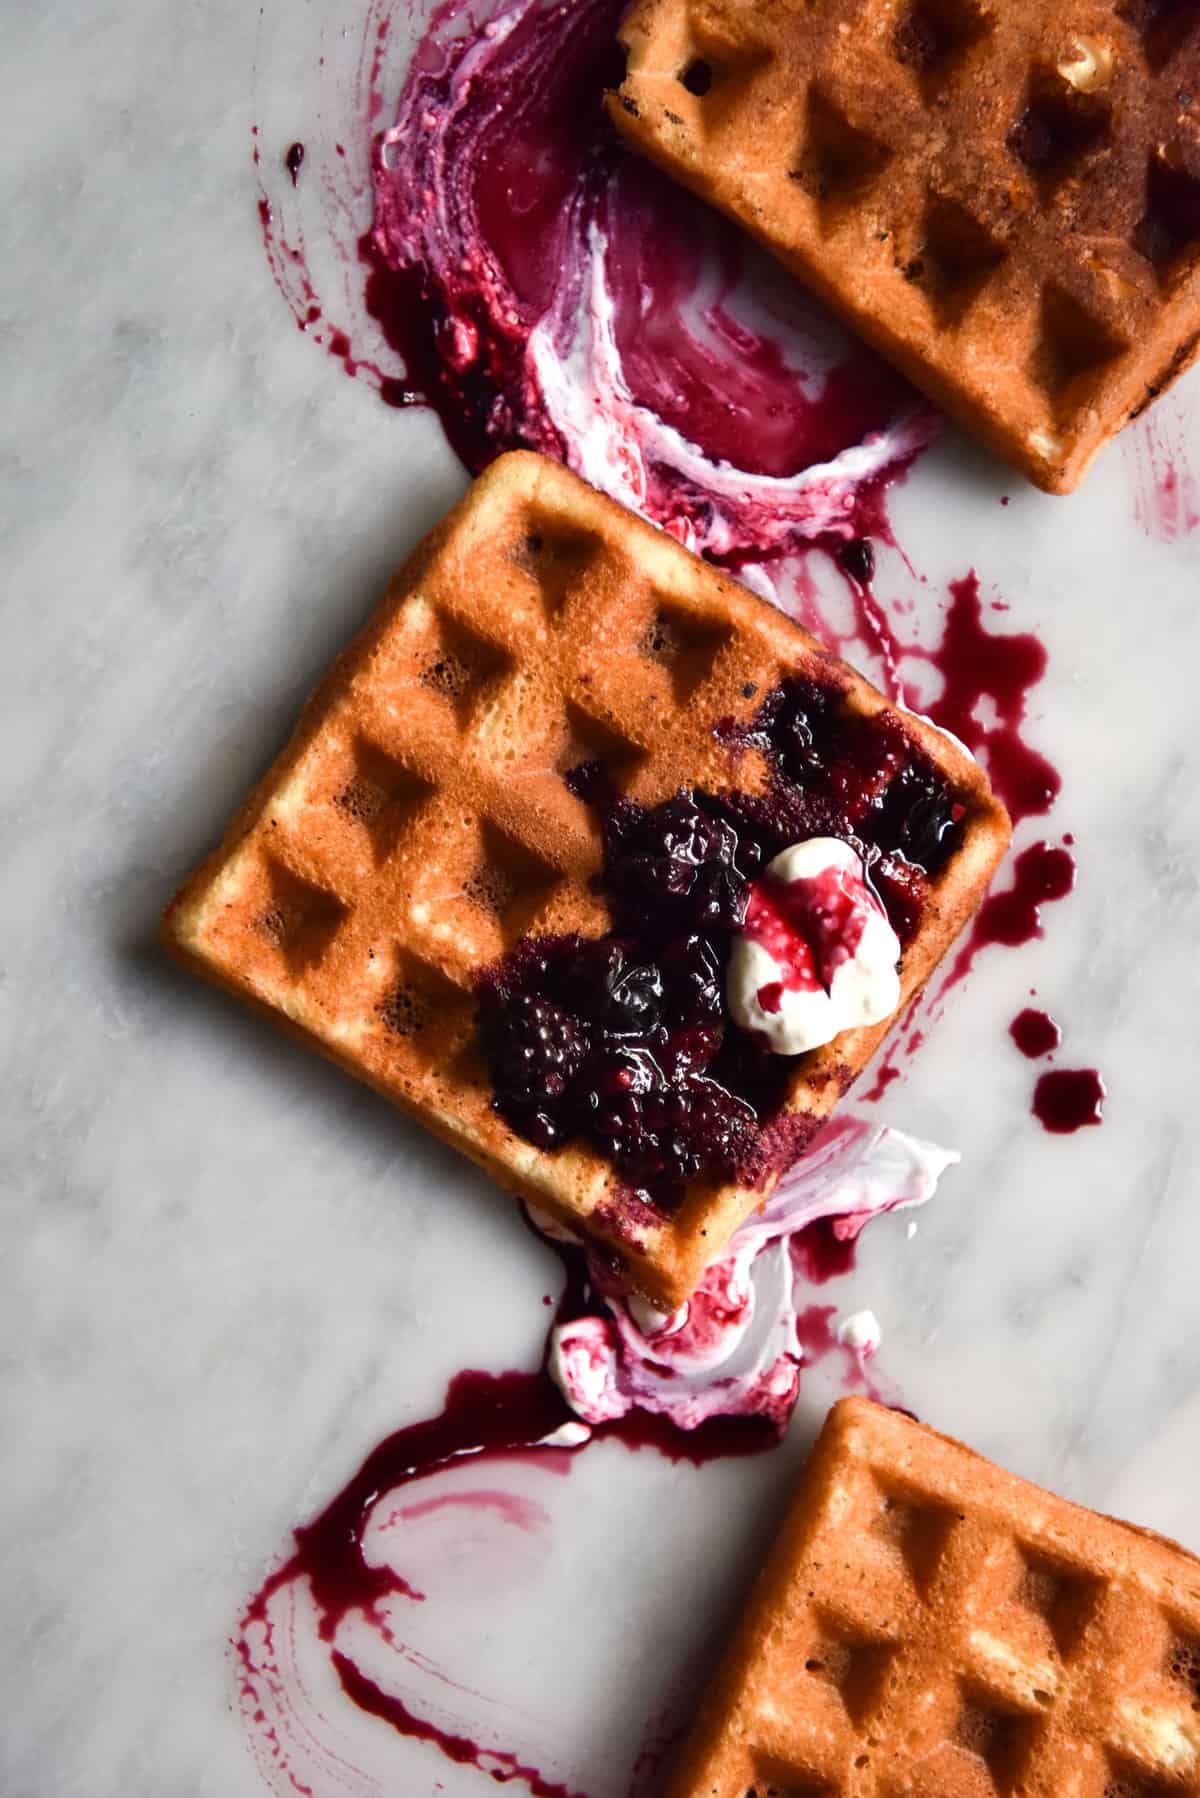 An aerial image of gluten free waffles atop a white marble table. The waffles are golden brown and topped with yoghurt and a berry compote which creates a beautiful marbled pattern over the waffle and the table.